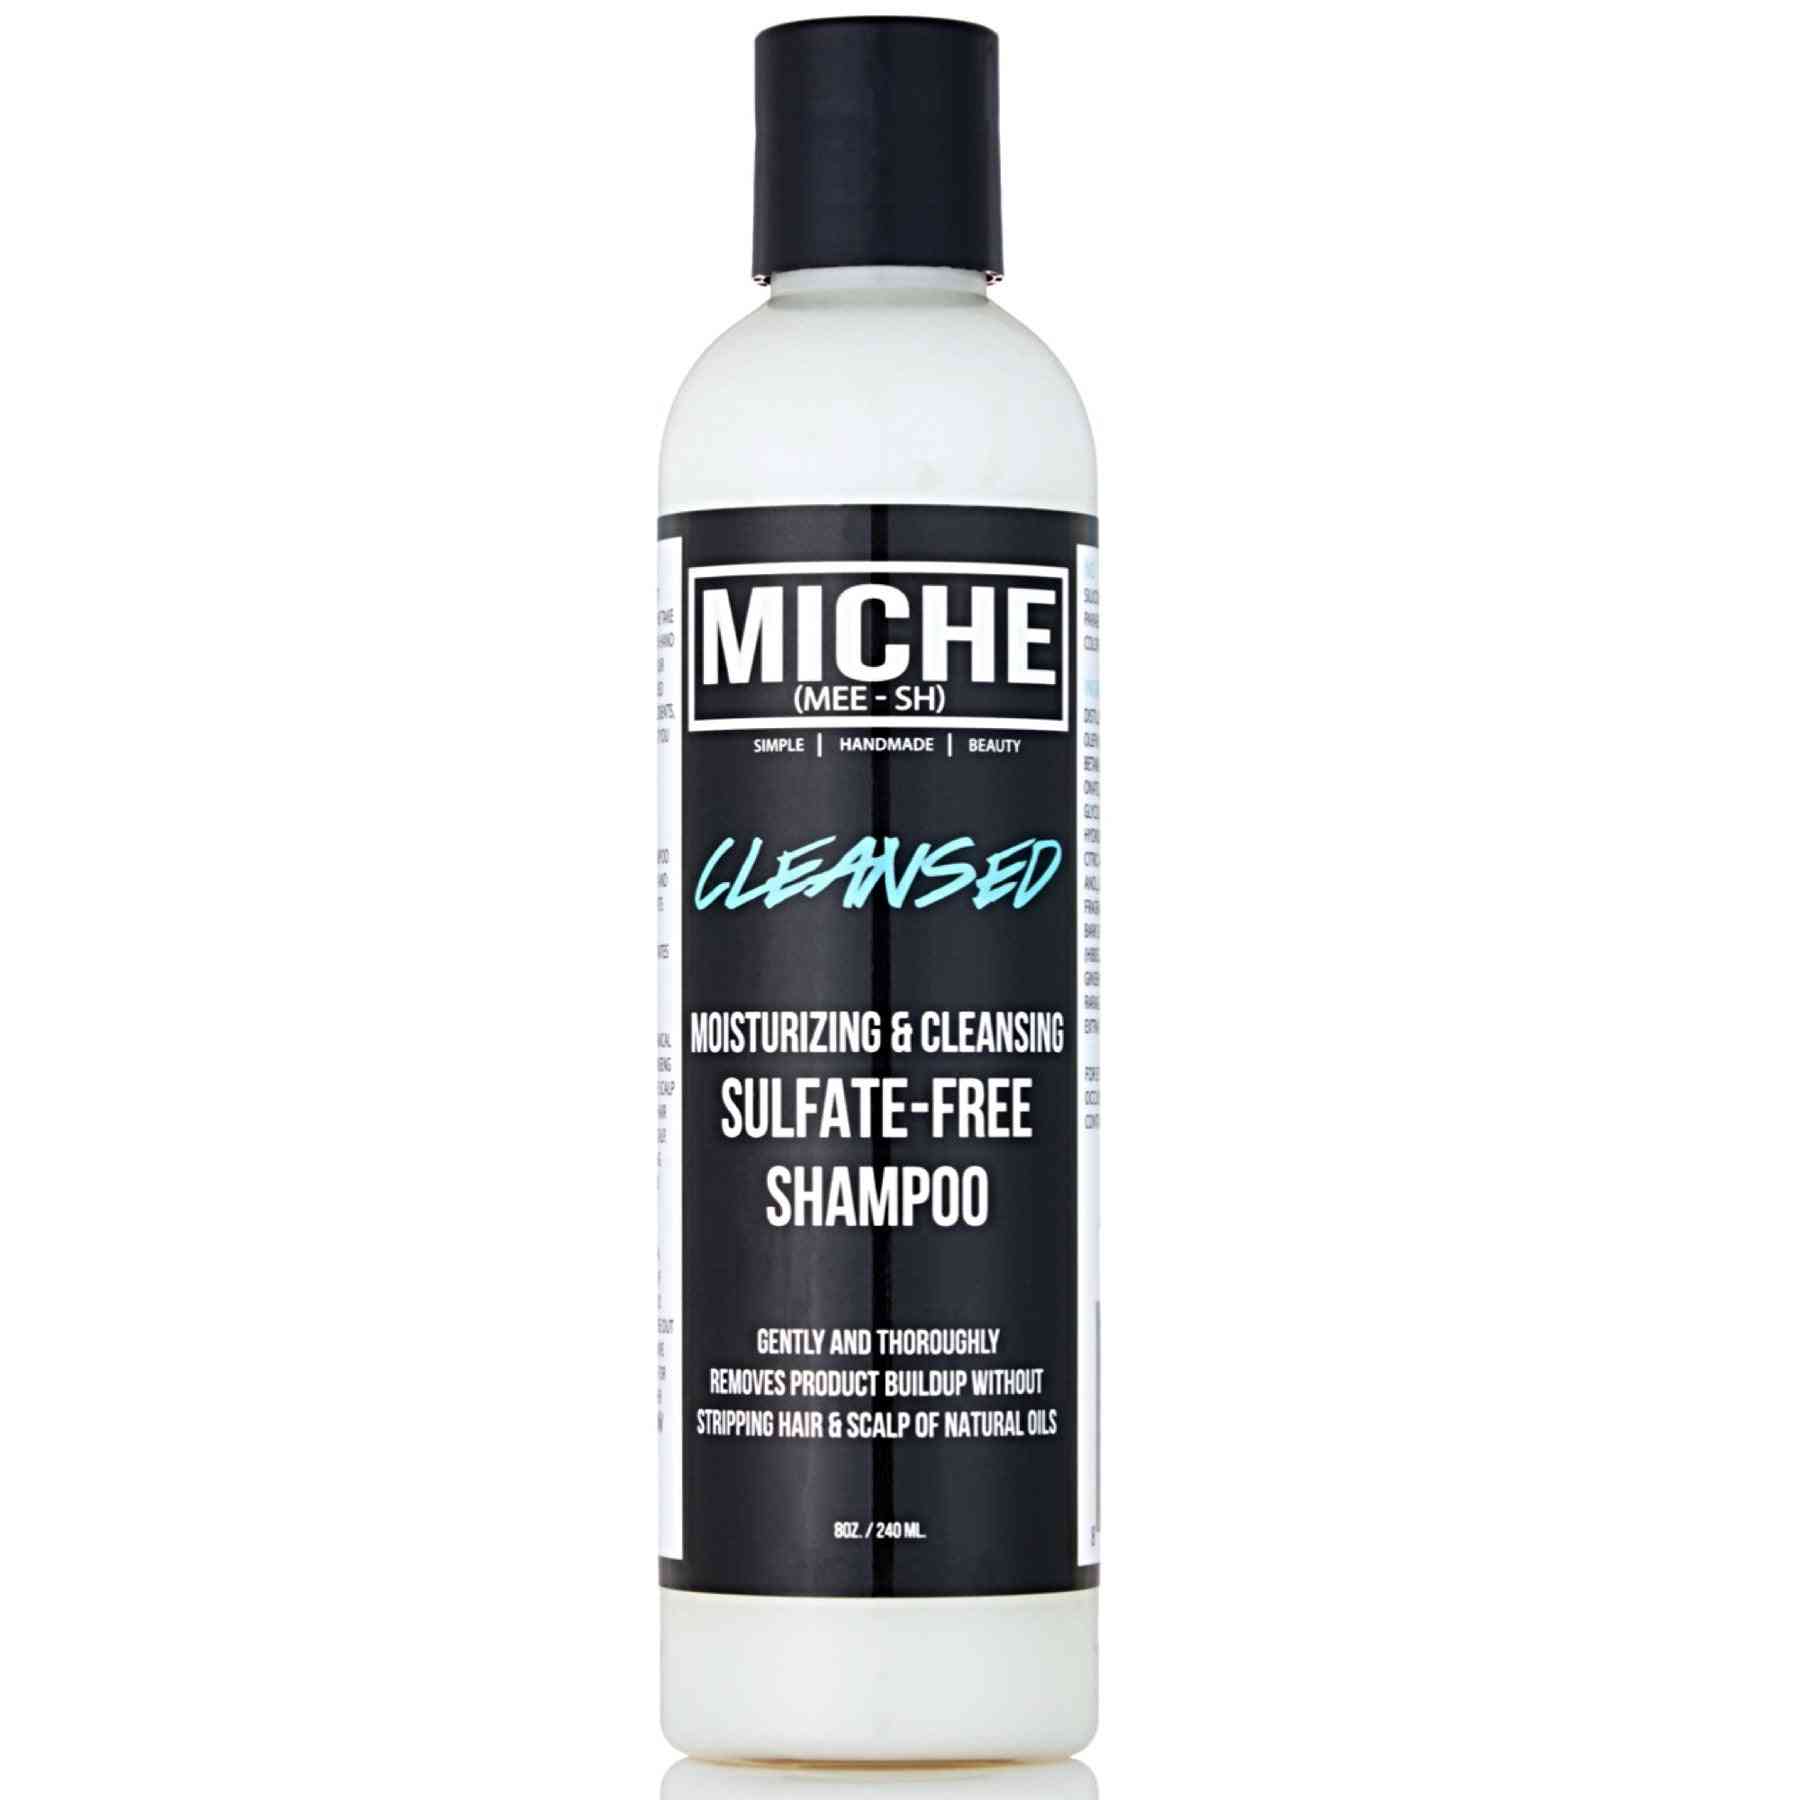 Miche beauty cleansed shampooing sans sulfate 8 oz